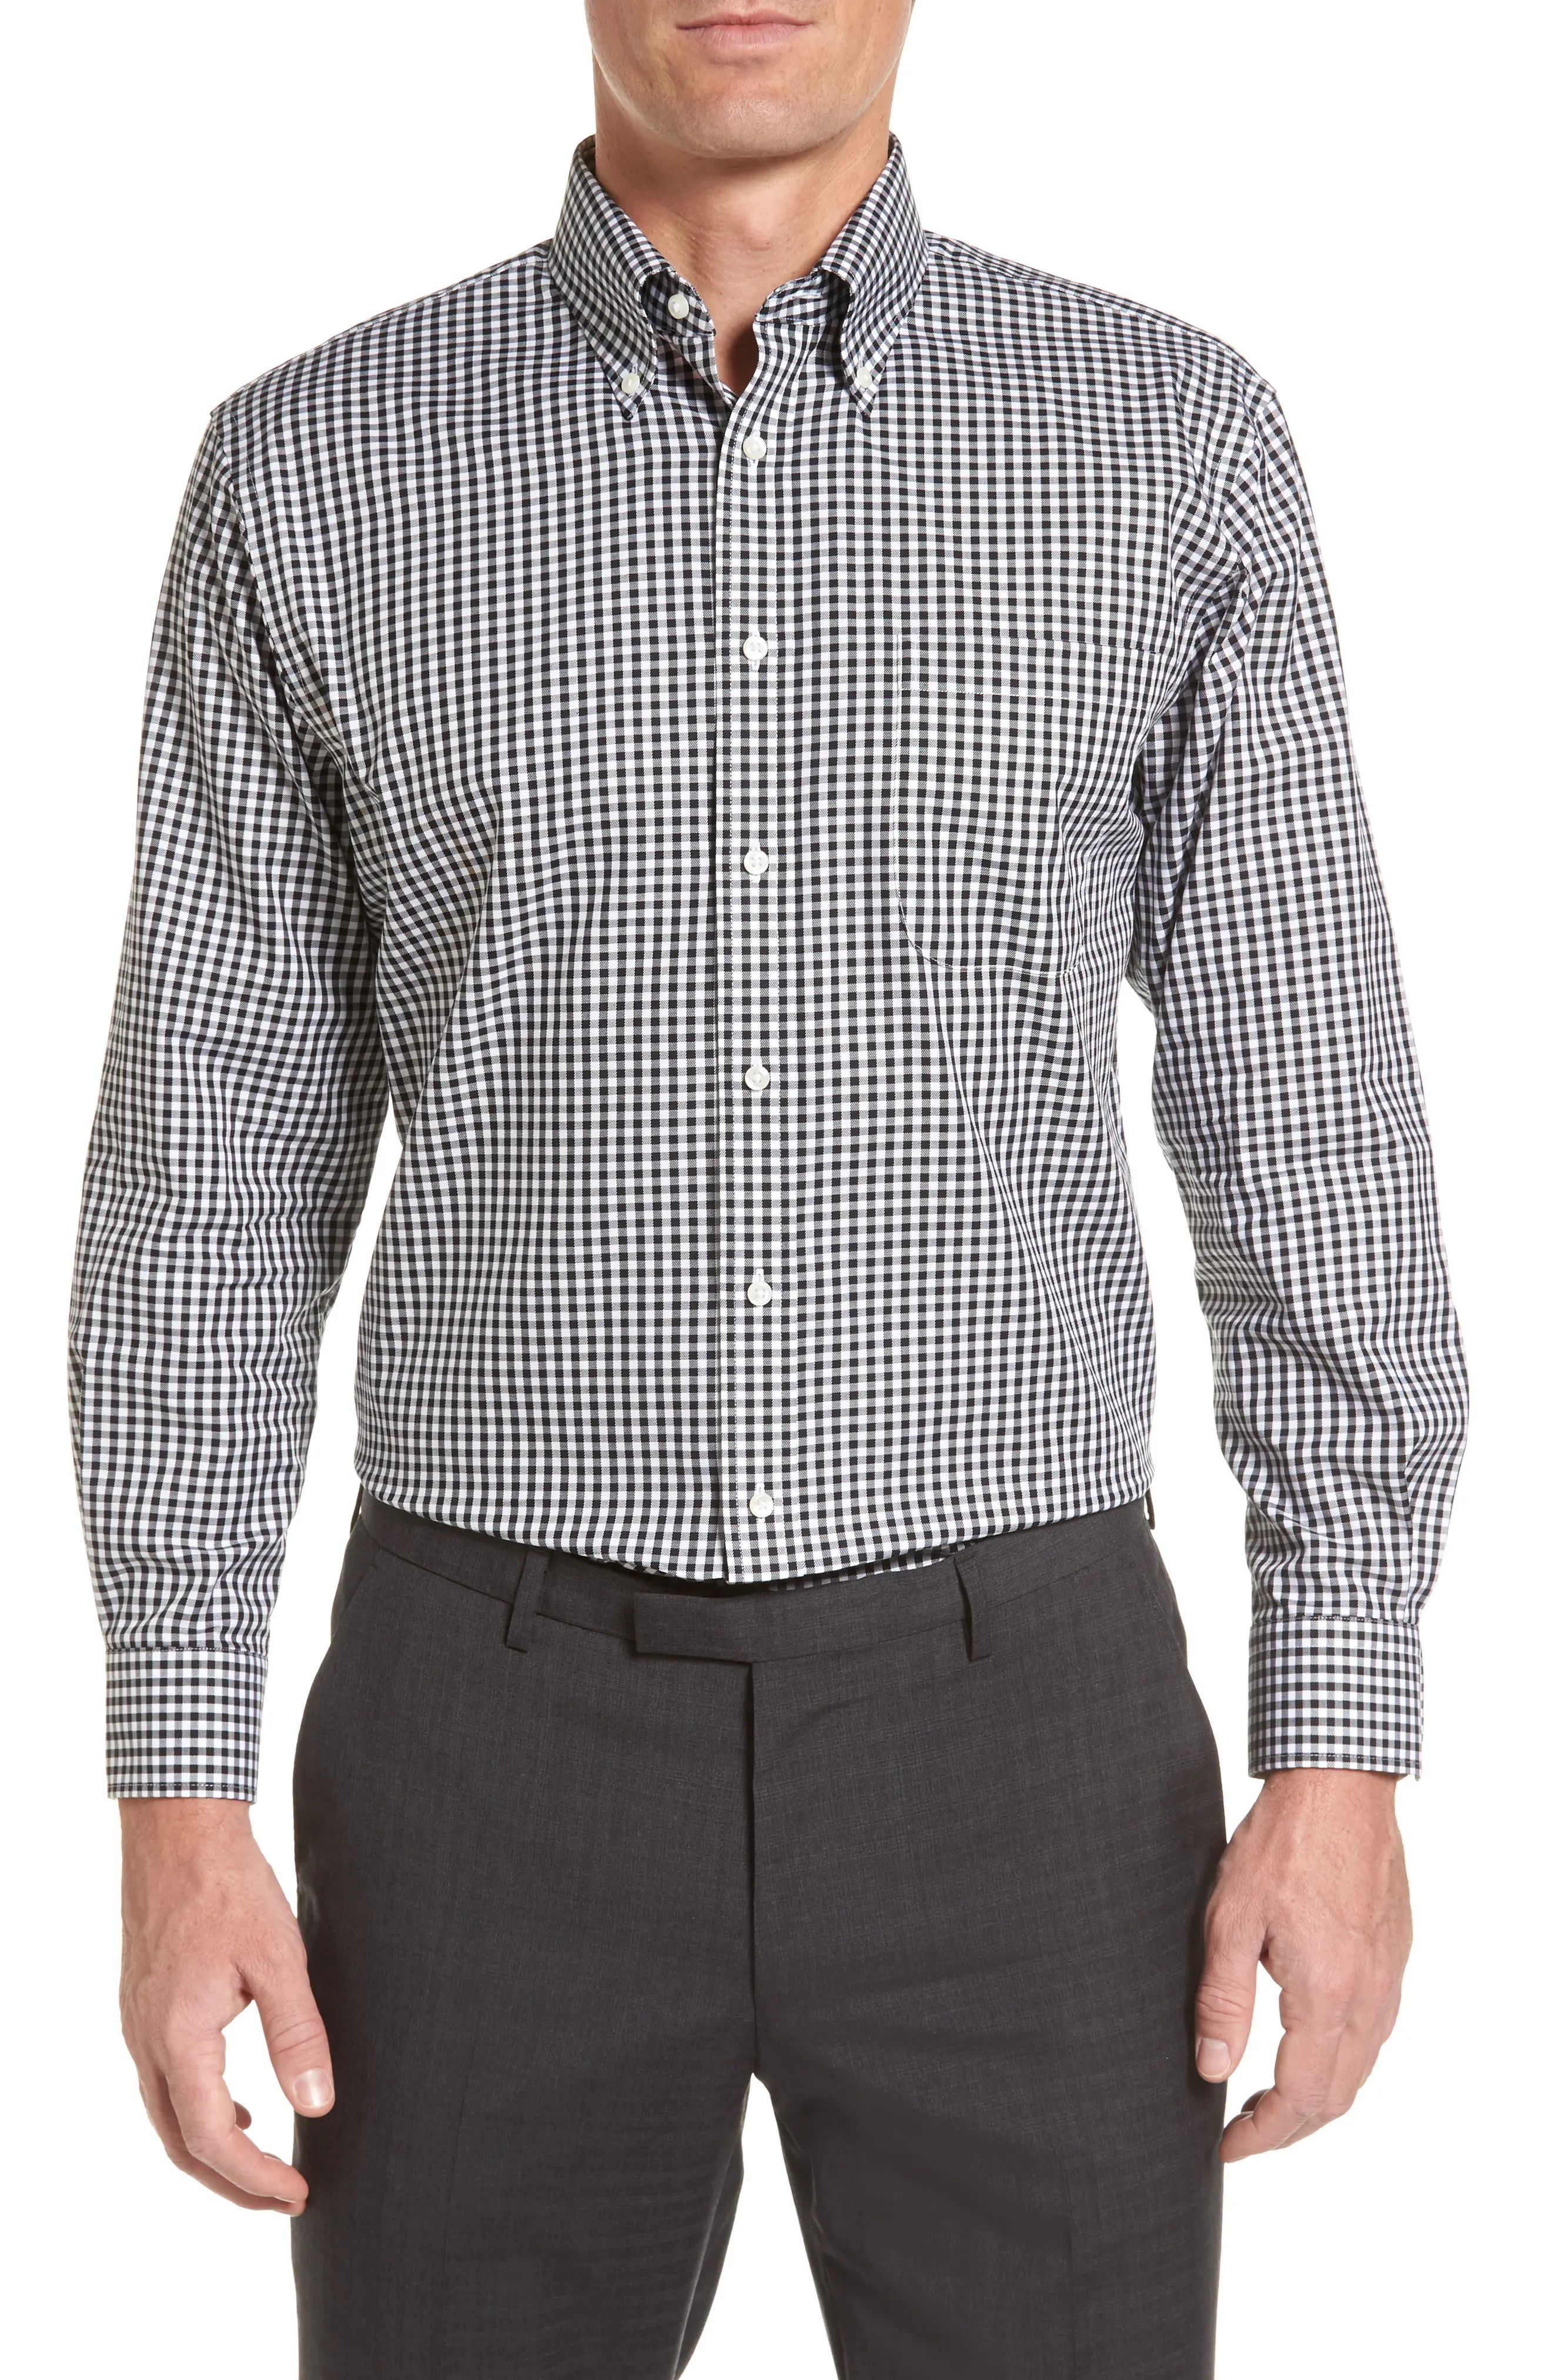 Nordstrom Men's Shop Traditional Fit Non-Iron Gingham Dress Shirt | Nordstrom